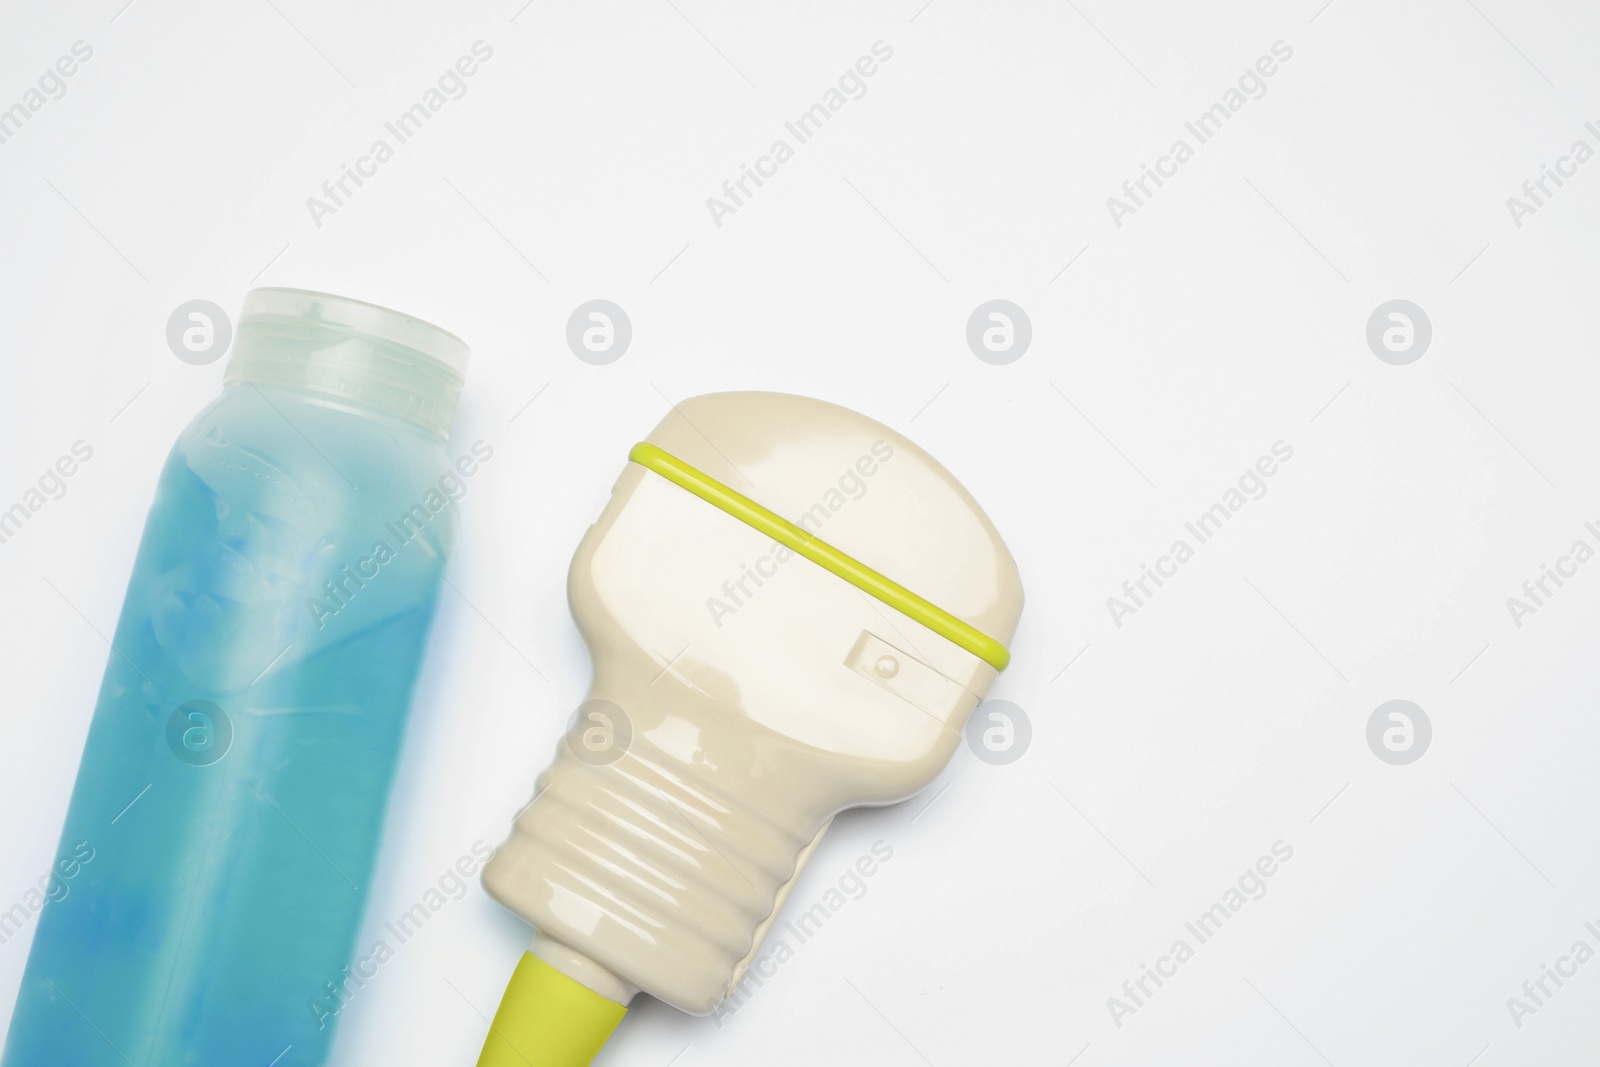 Photo of Ultrasonic transducer and ultrasound transmission gel on light background, flat lay. Space for text